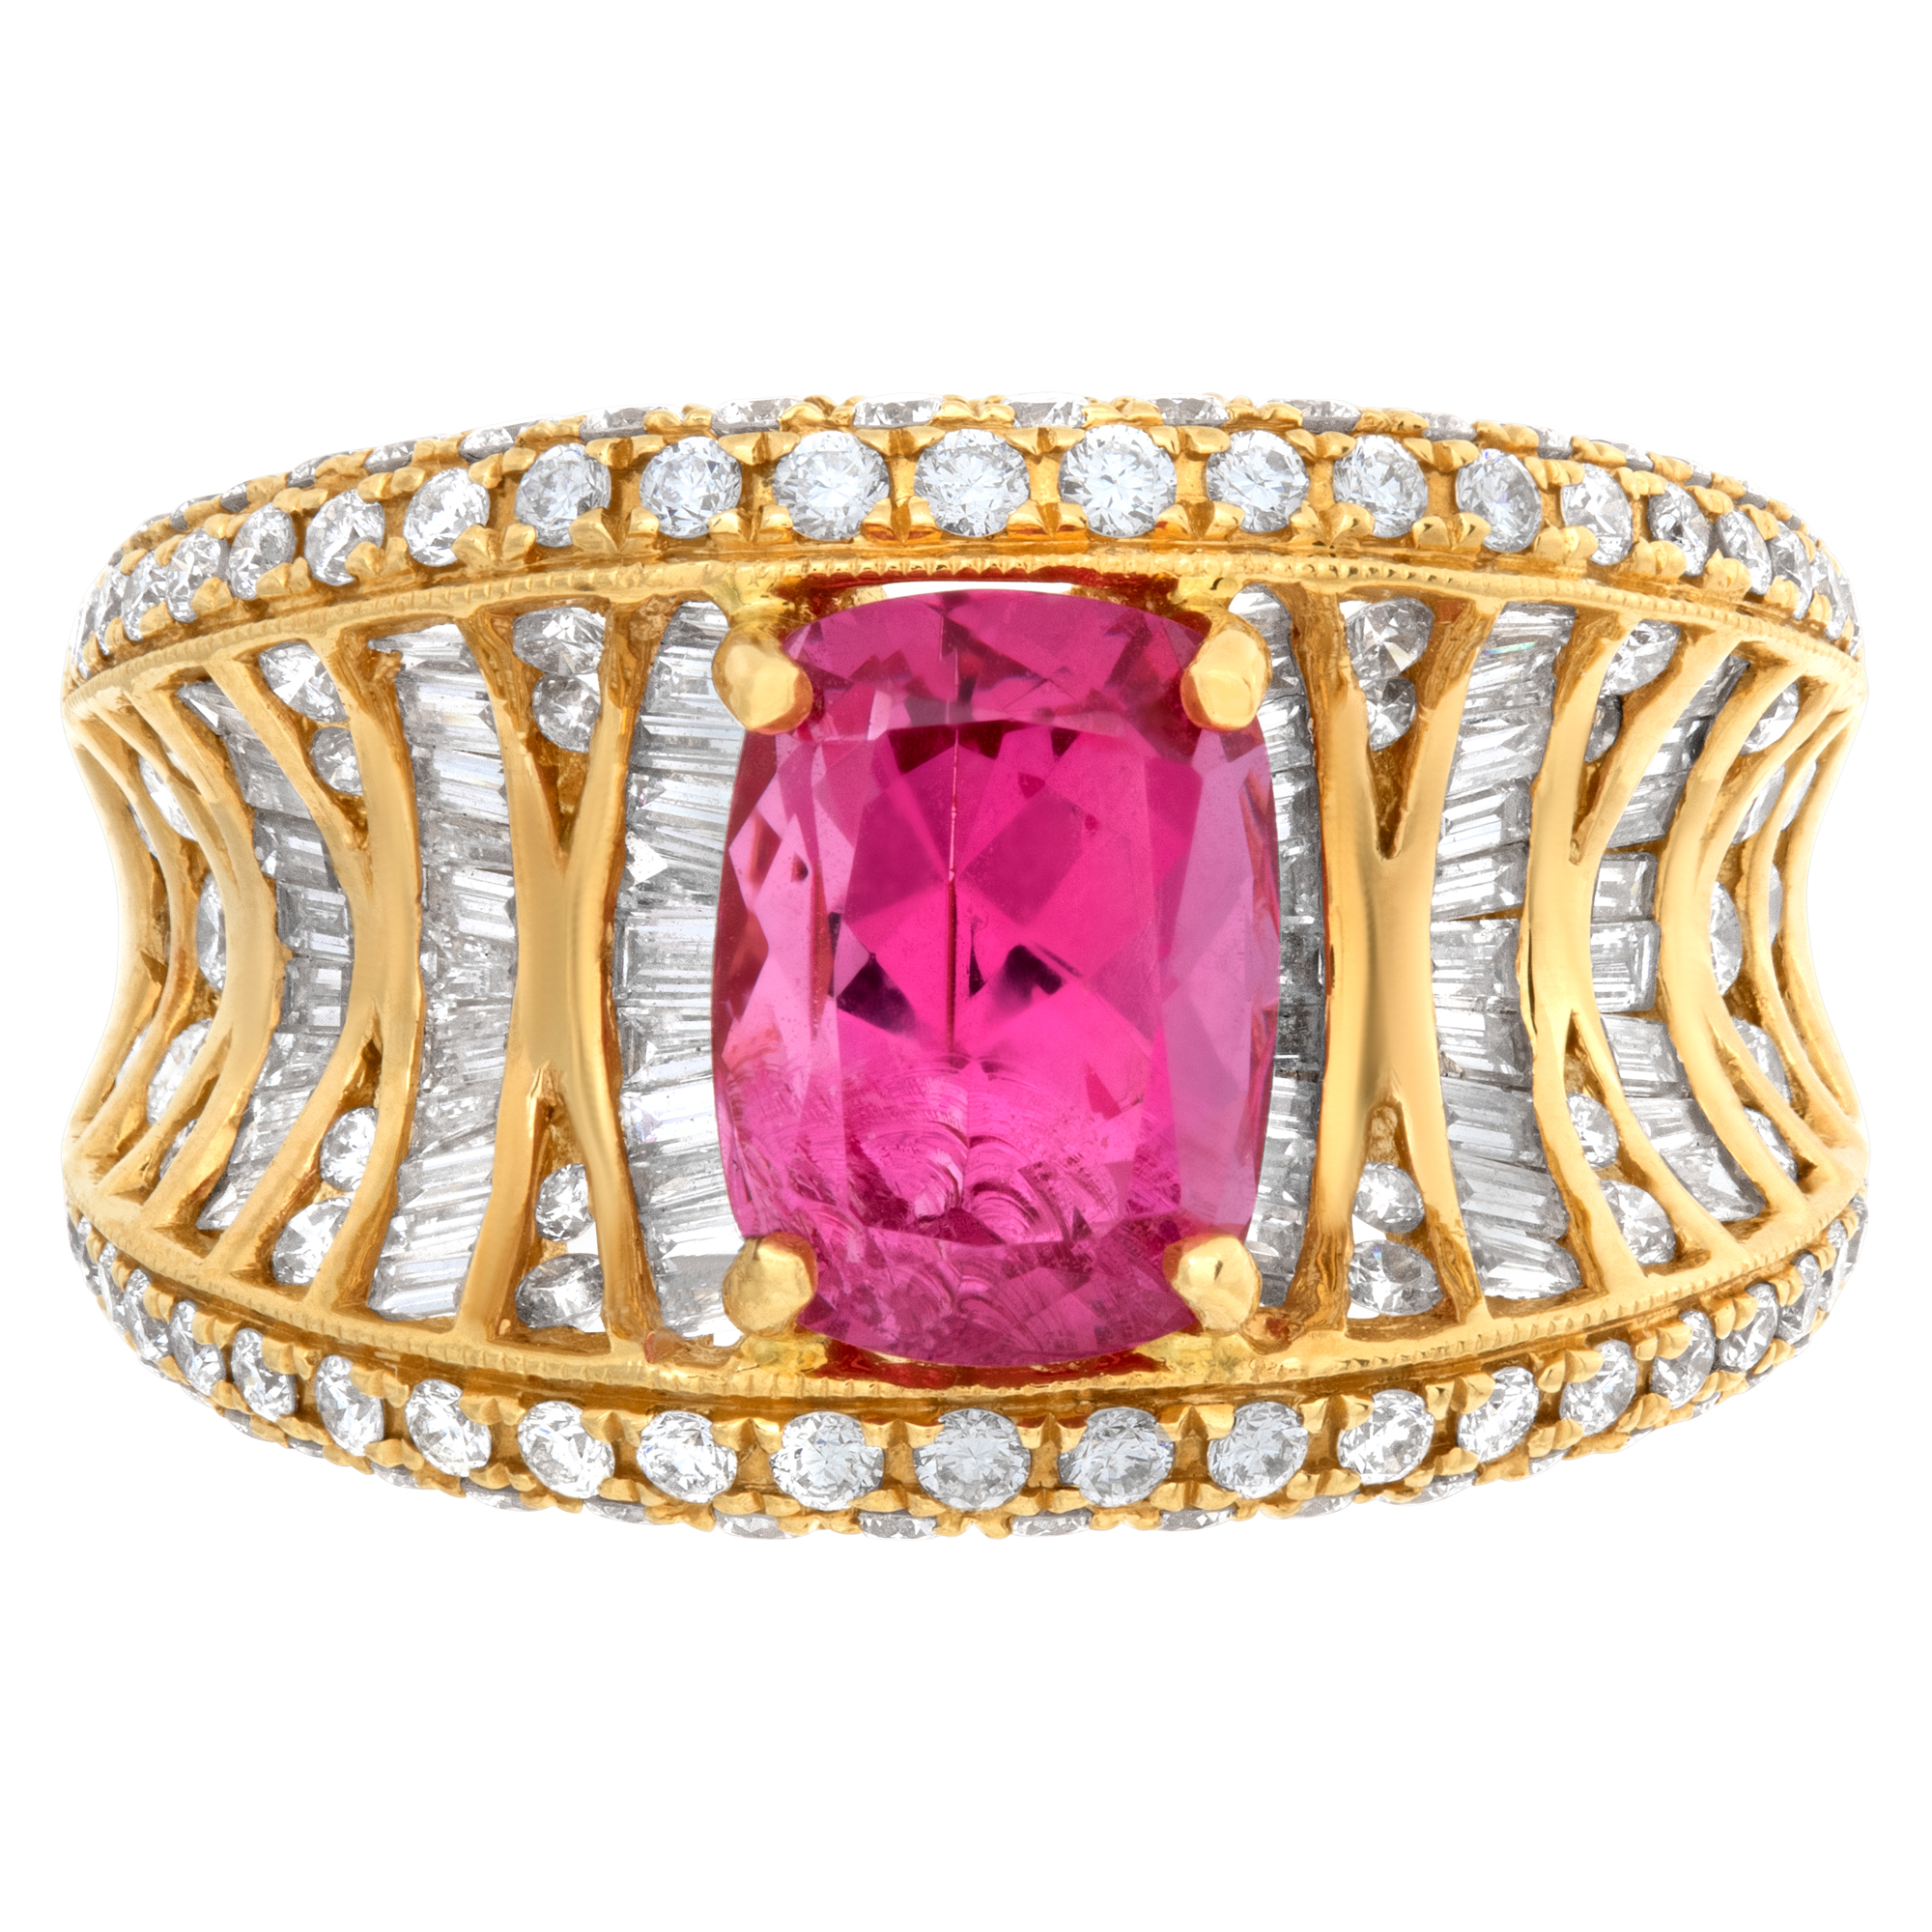 Oval brilliant cut pink spinel (2.73 carats) & diamonds ring set in 18k yellow gold image 2